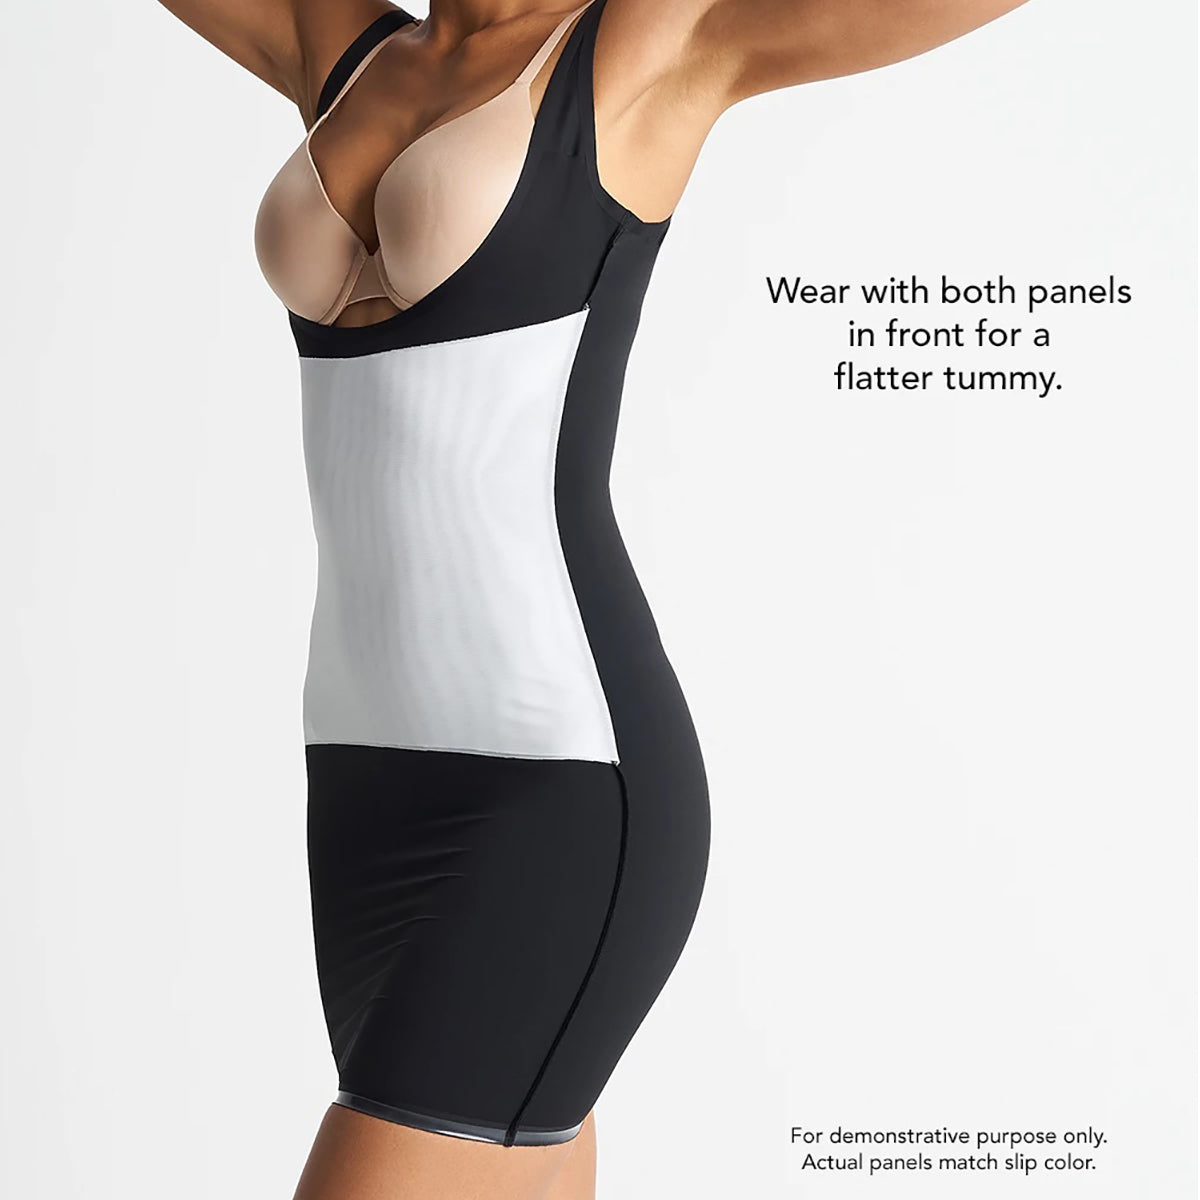 Yummie 3-in-1 Wear Your Own Bra Shaping Slip YT3-174 in black on model front showing panels